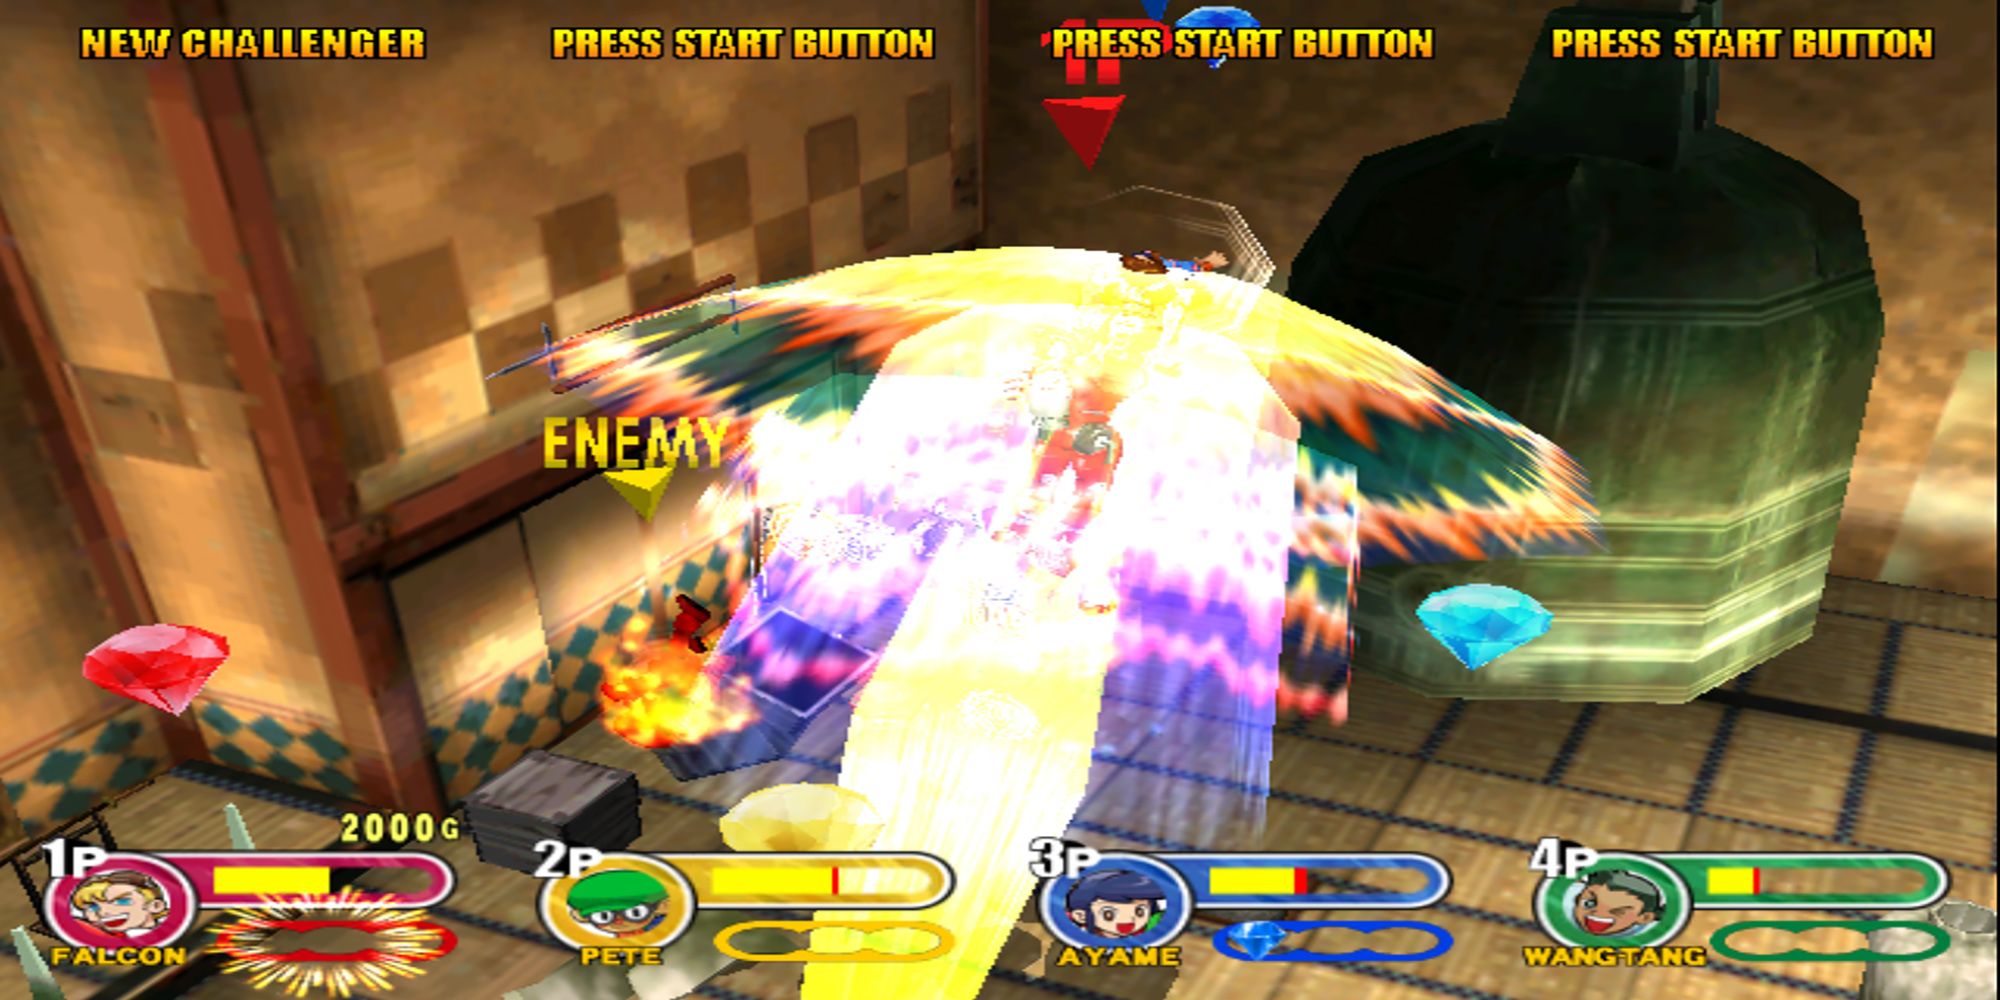 Falcon charges into his foes during a battle inside a Japanese castle in Power Stone 2.